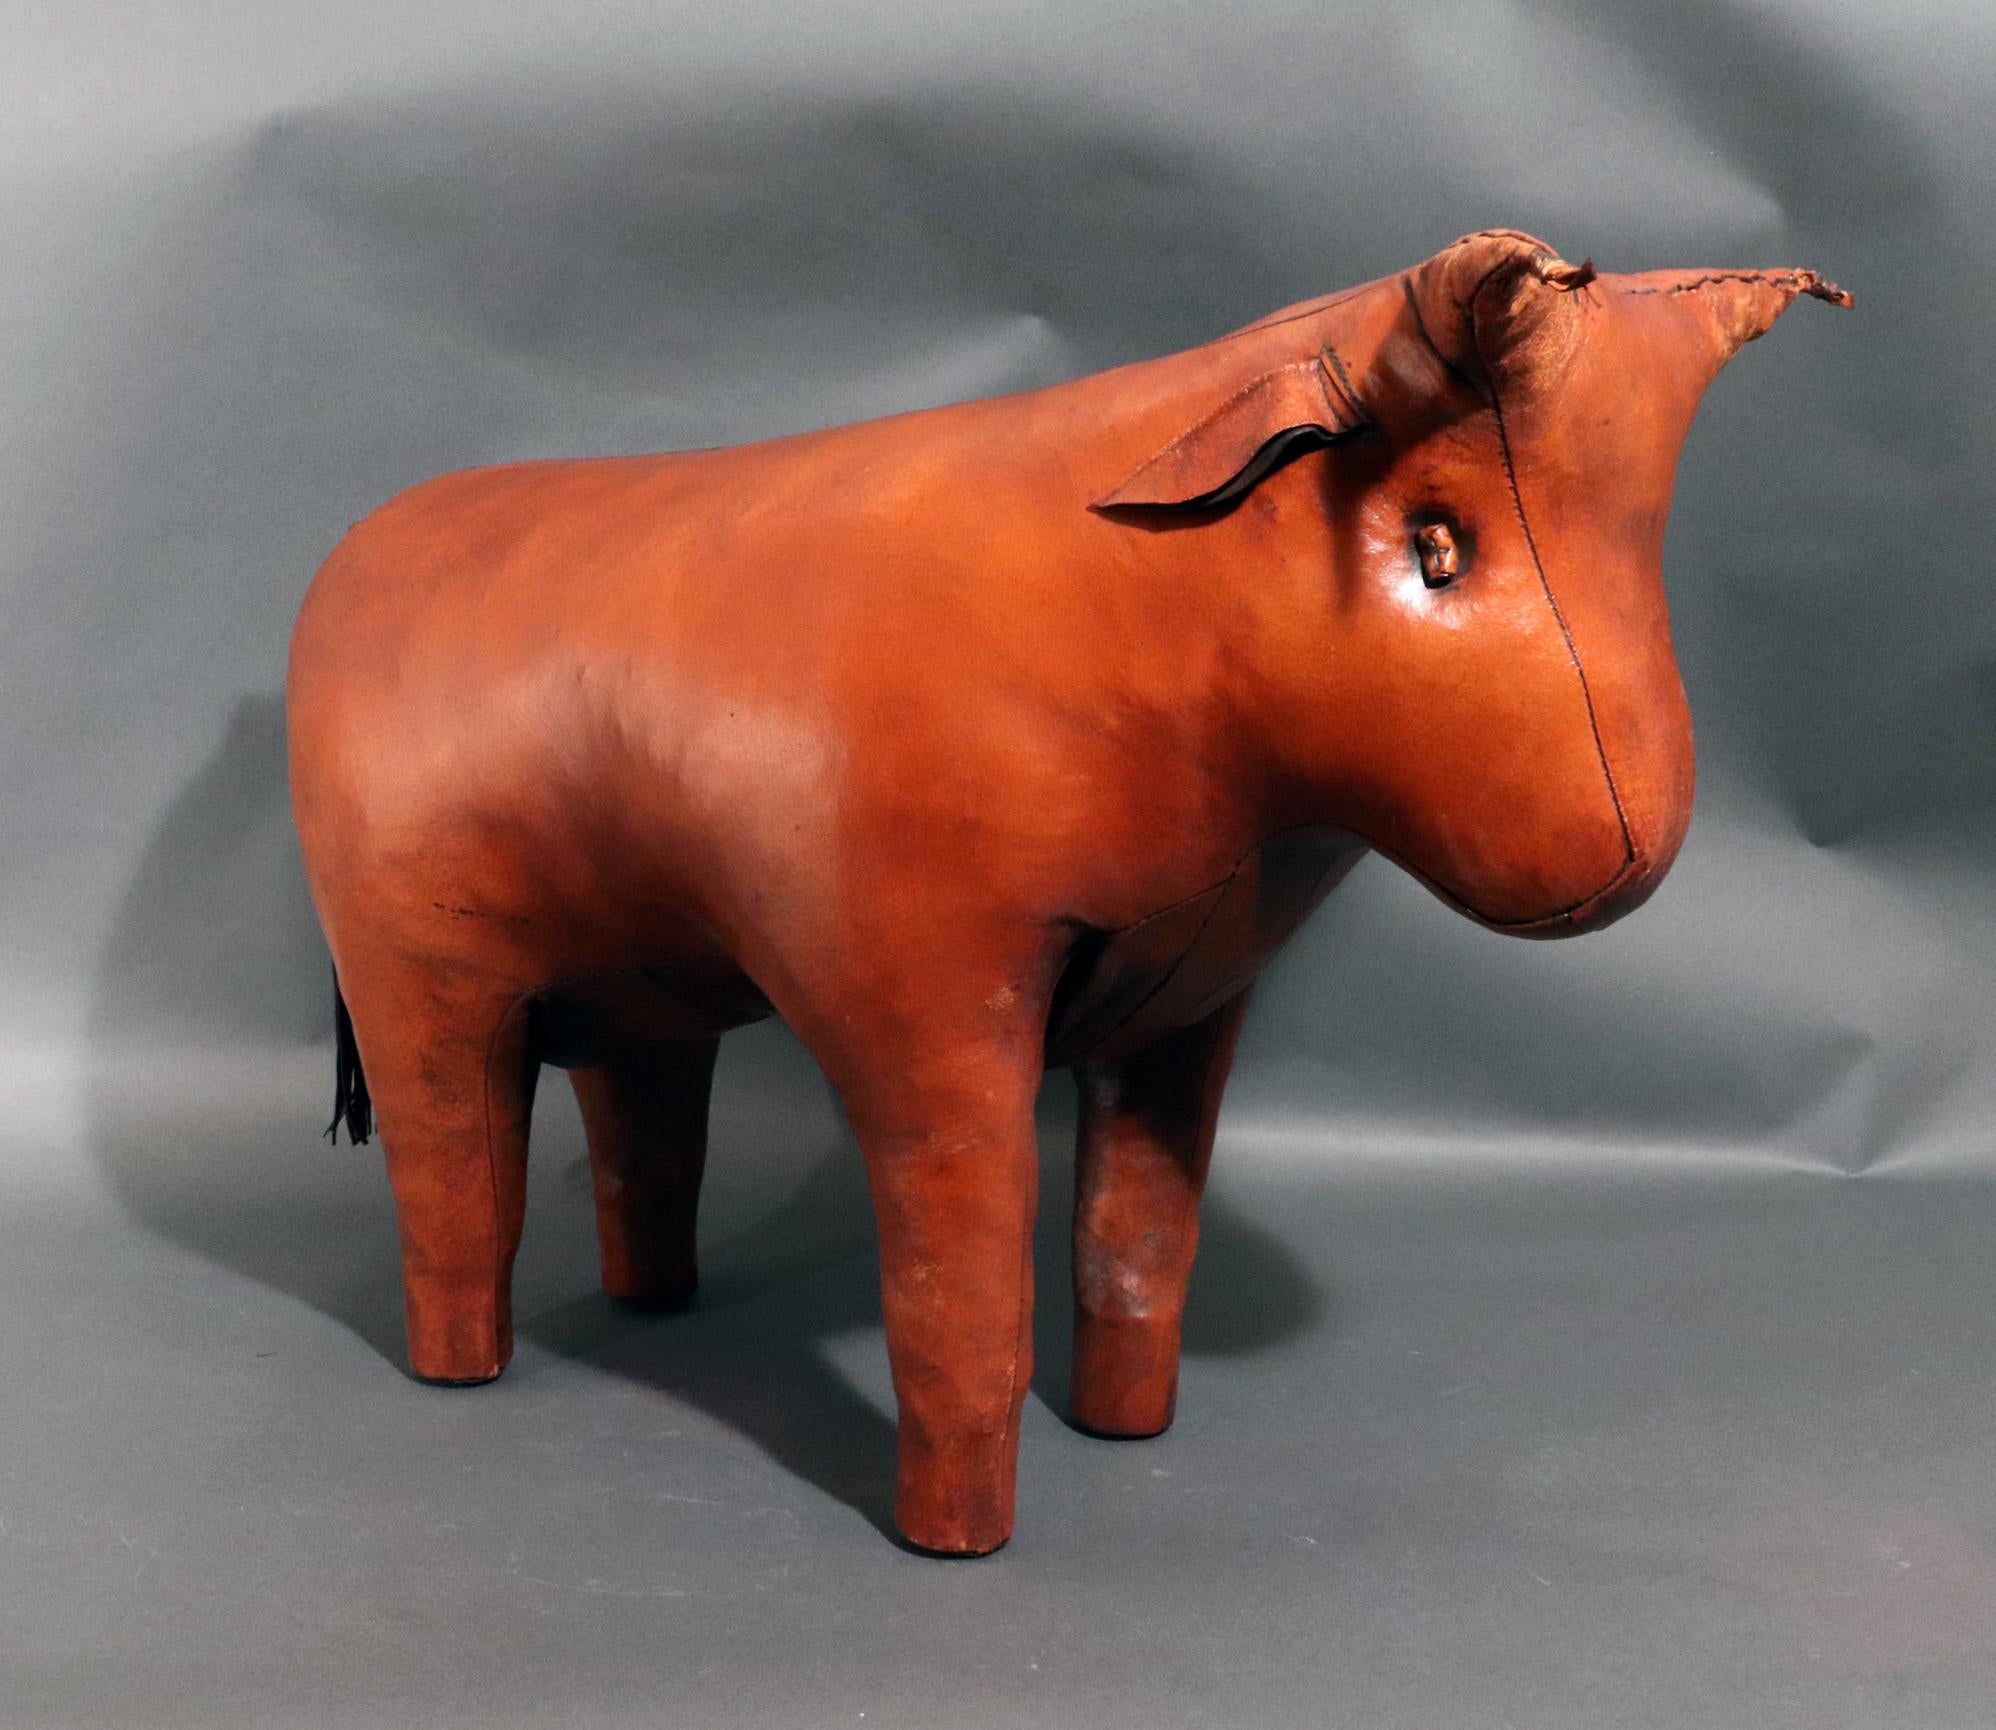 MCM Vintage Leather Bull,
Dimitri Omersa for Liberty of London,
The 1960-70s

The rare Dimitri Omersa leather footstool is designed in the shape of a bull in an usual light colored leather.  This is a rare subject and very unusual